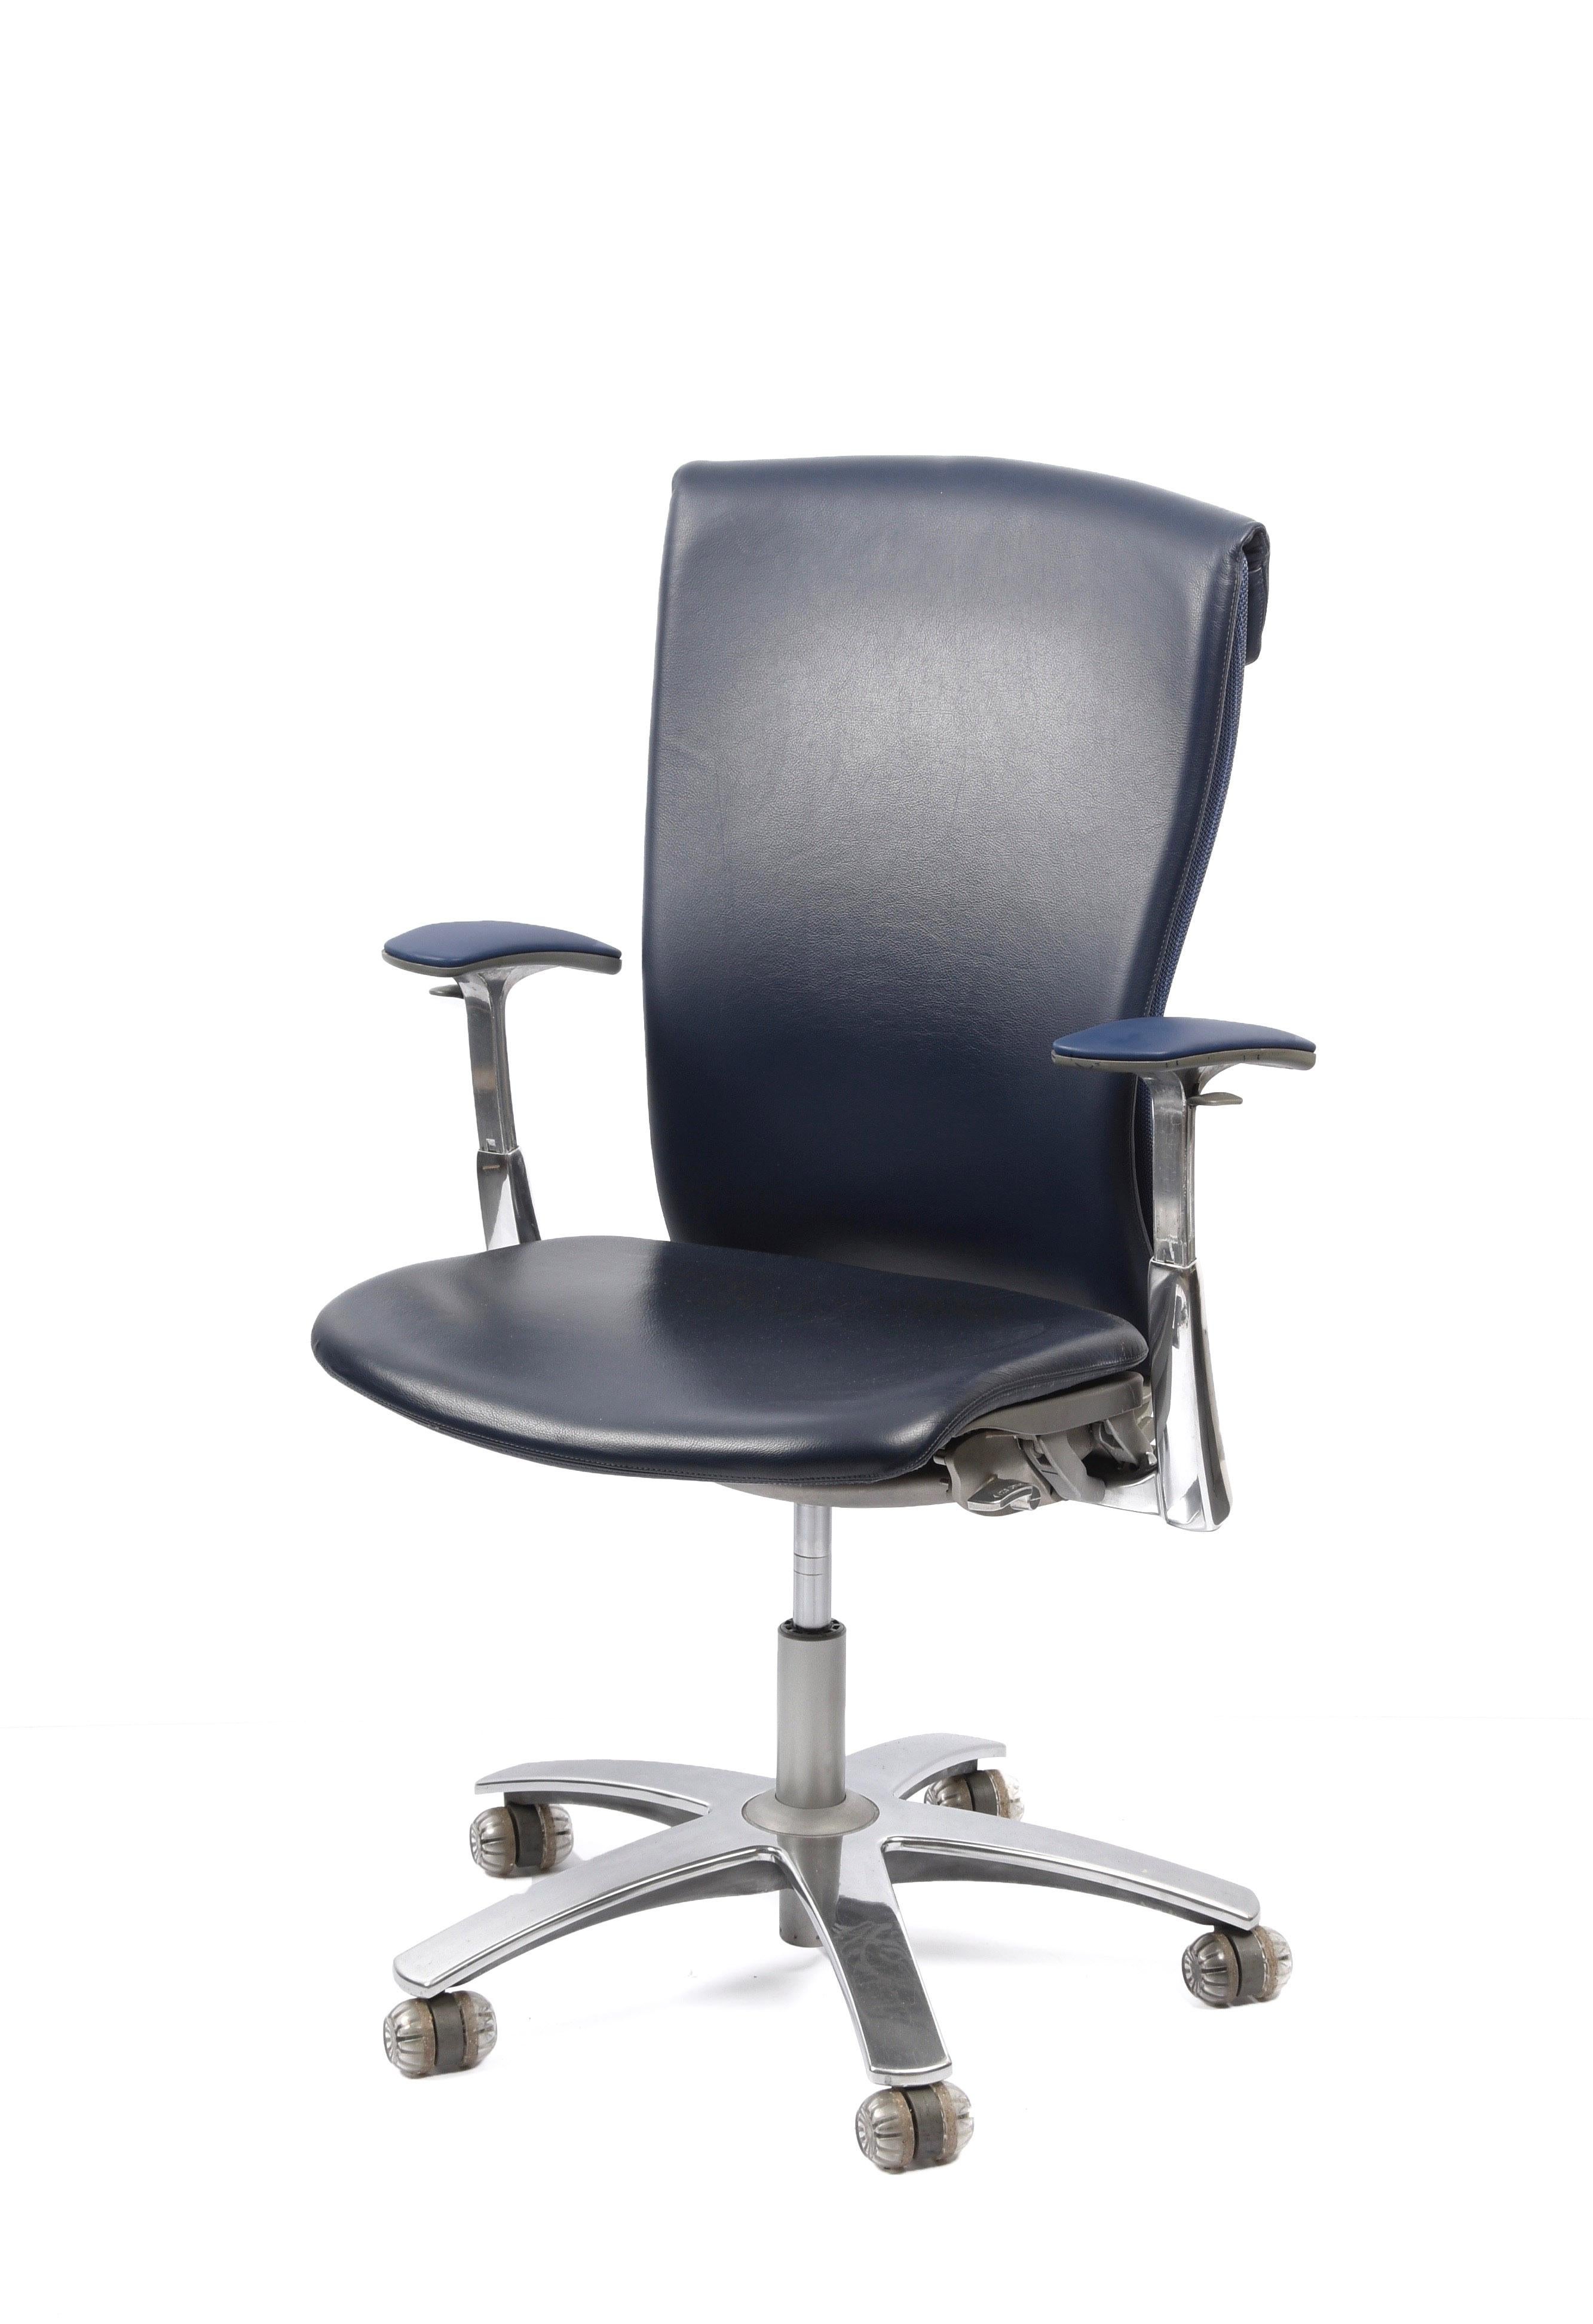 Amazing early 21st Century aluminium and Italian blue leather office armchair. This chair model, the 